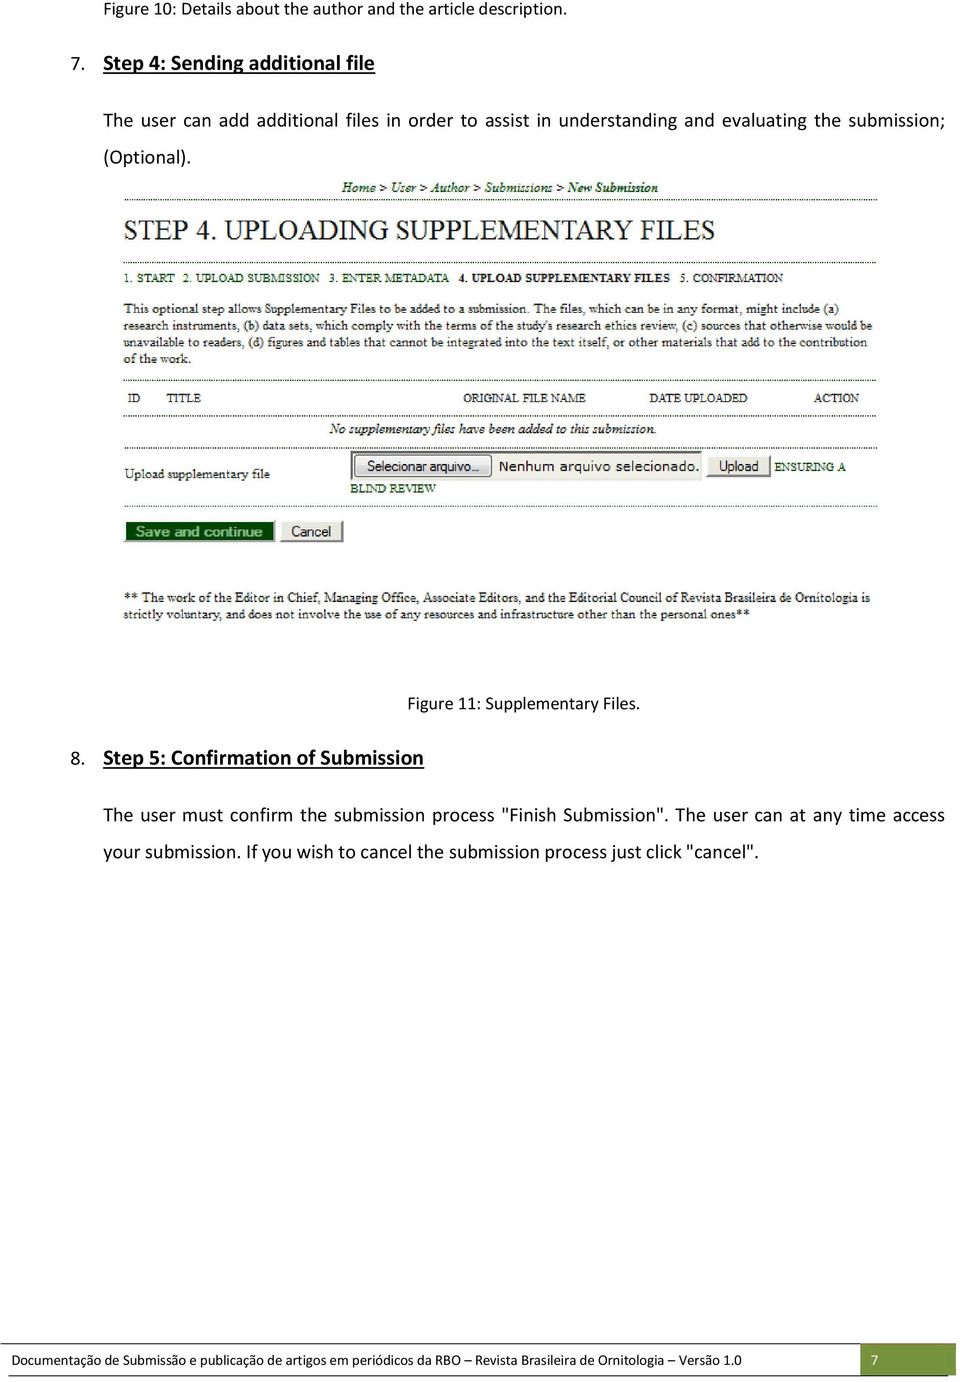 Figure 11: Supplementary Files. 8. Step 5: Confirmation of Submission The user must confirm the submission process "Finish Submission".